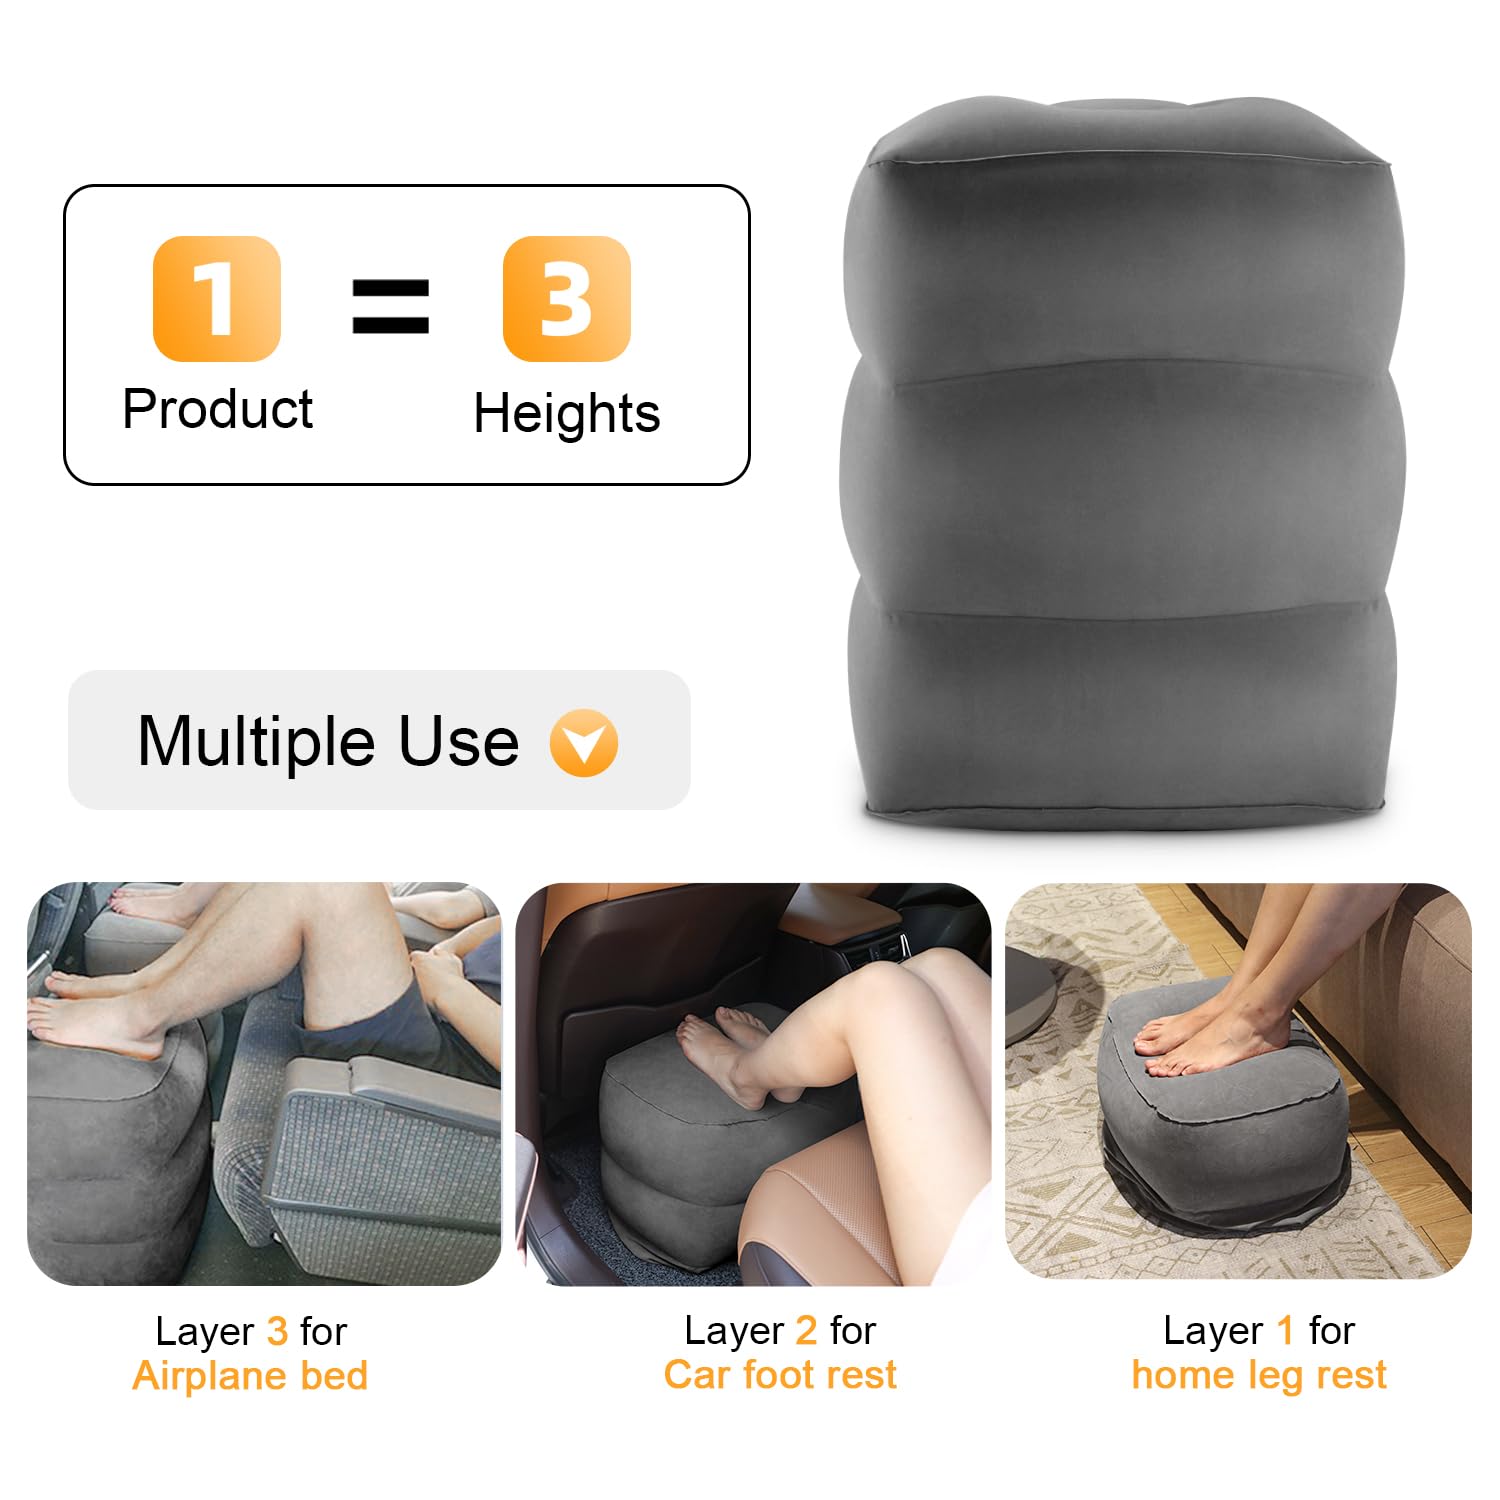 Maliton Inflatable Travel Footrest Pillow, (Dark Grey, 1 Pack).